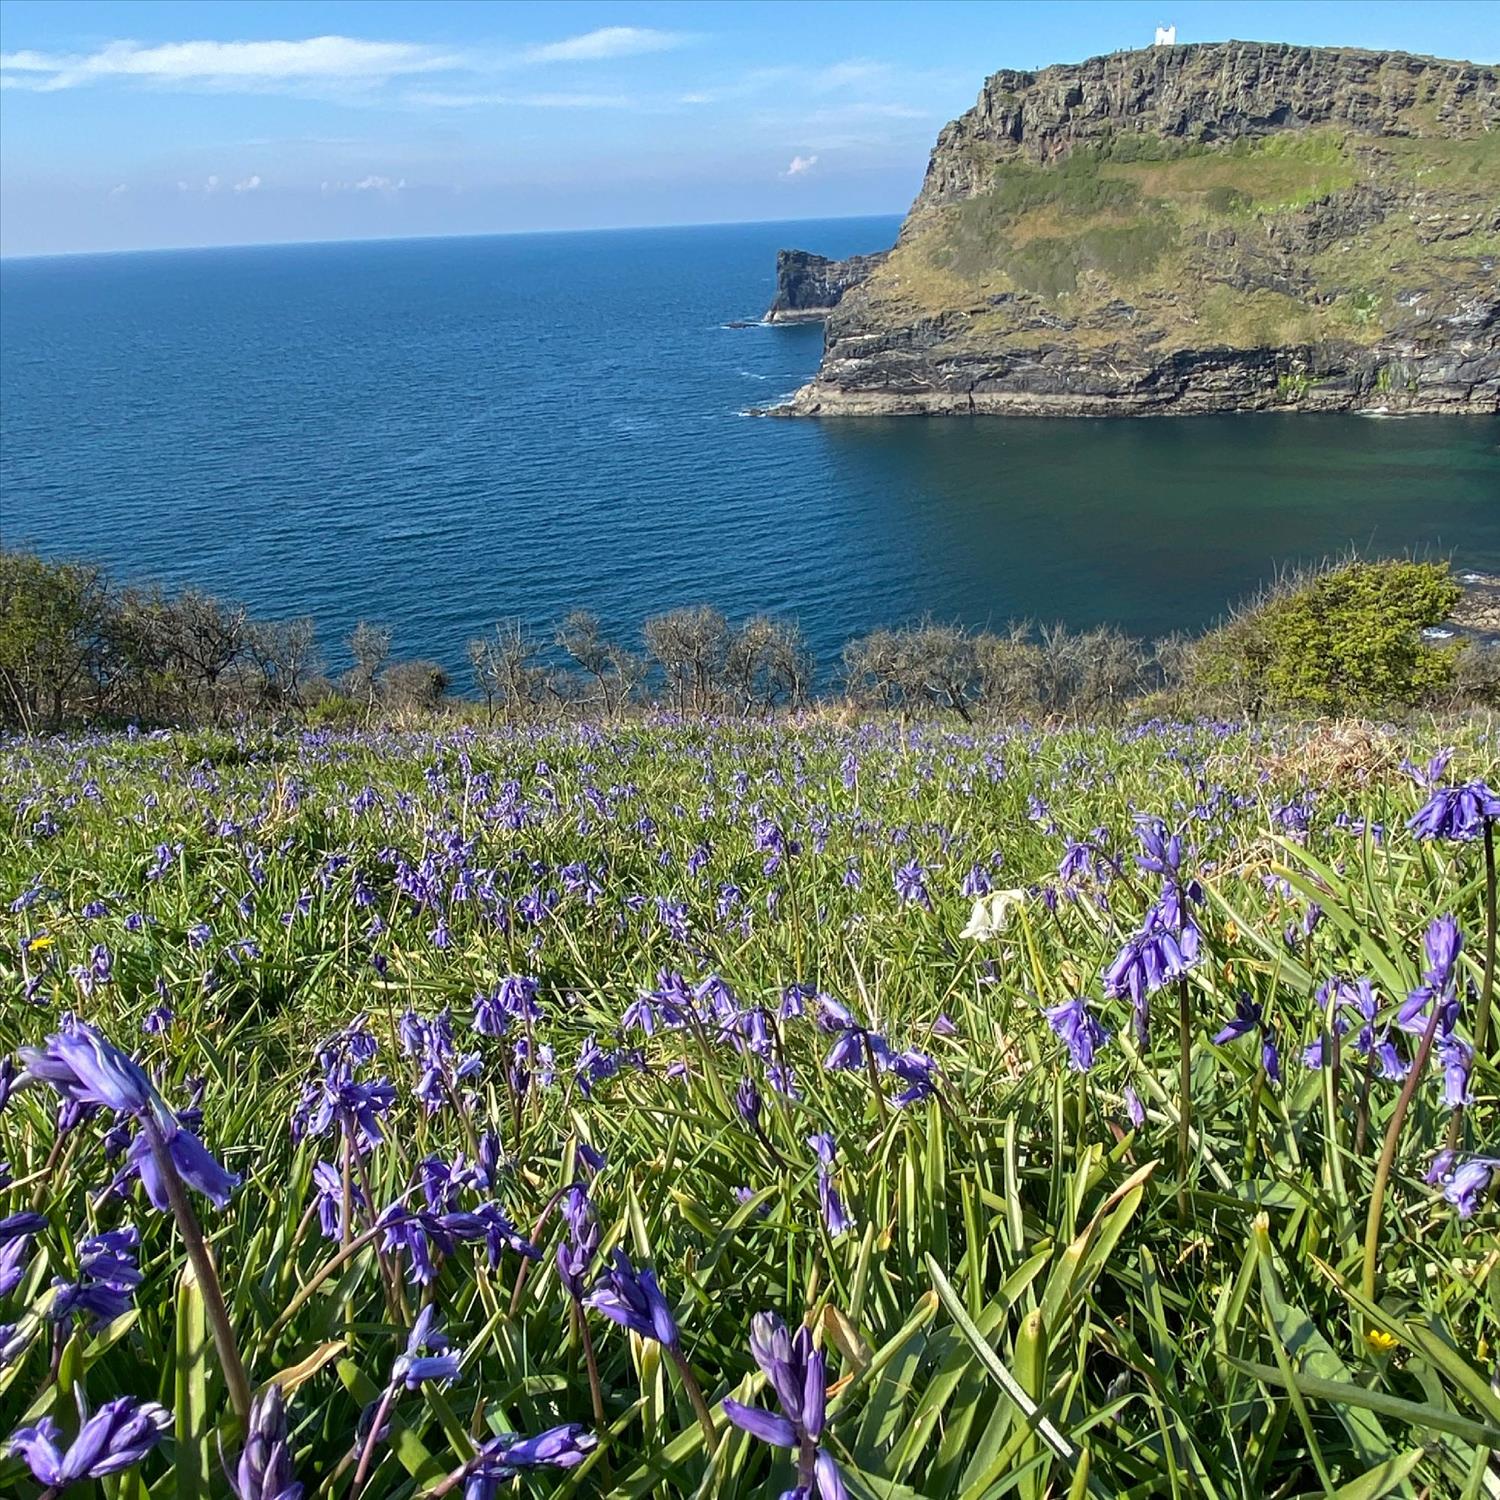 Bluebells in Boscastle, with the deep blue of the Atlantic Ocean in the background